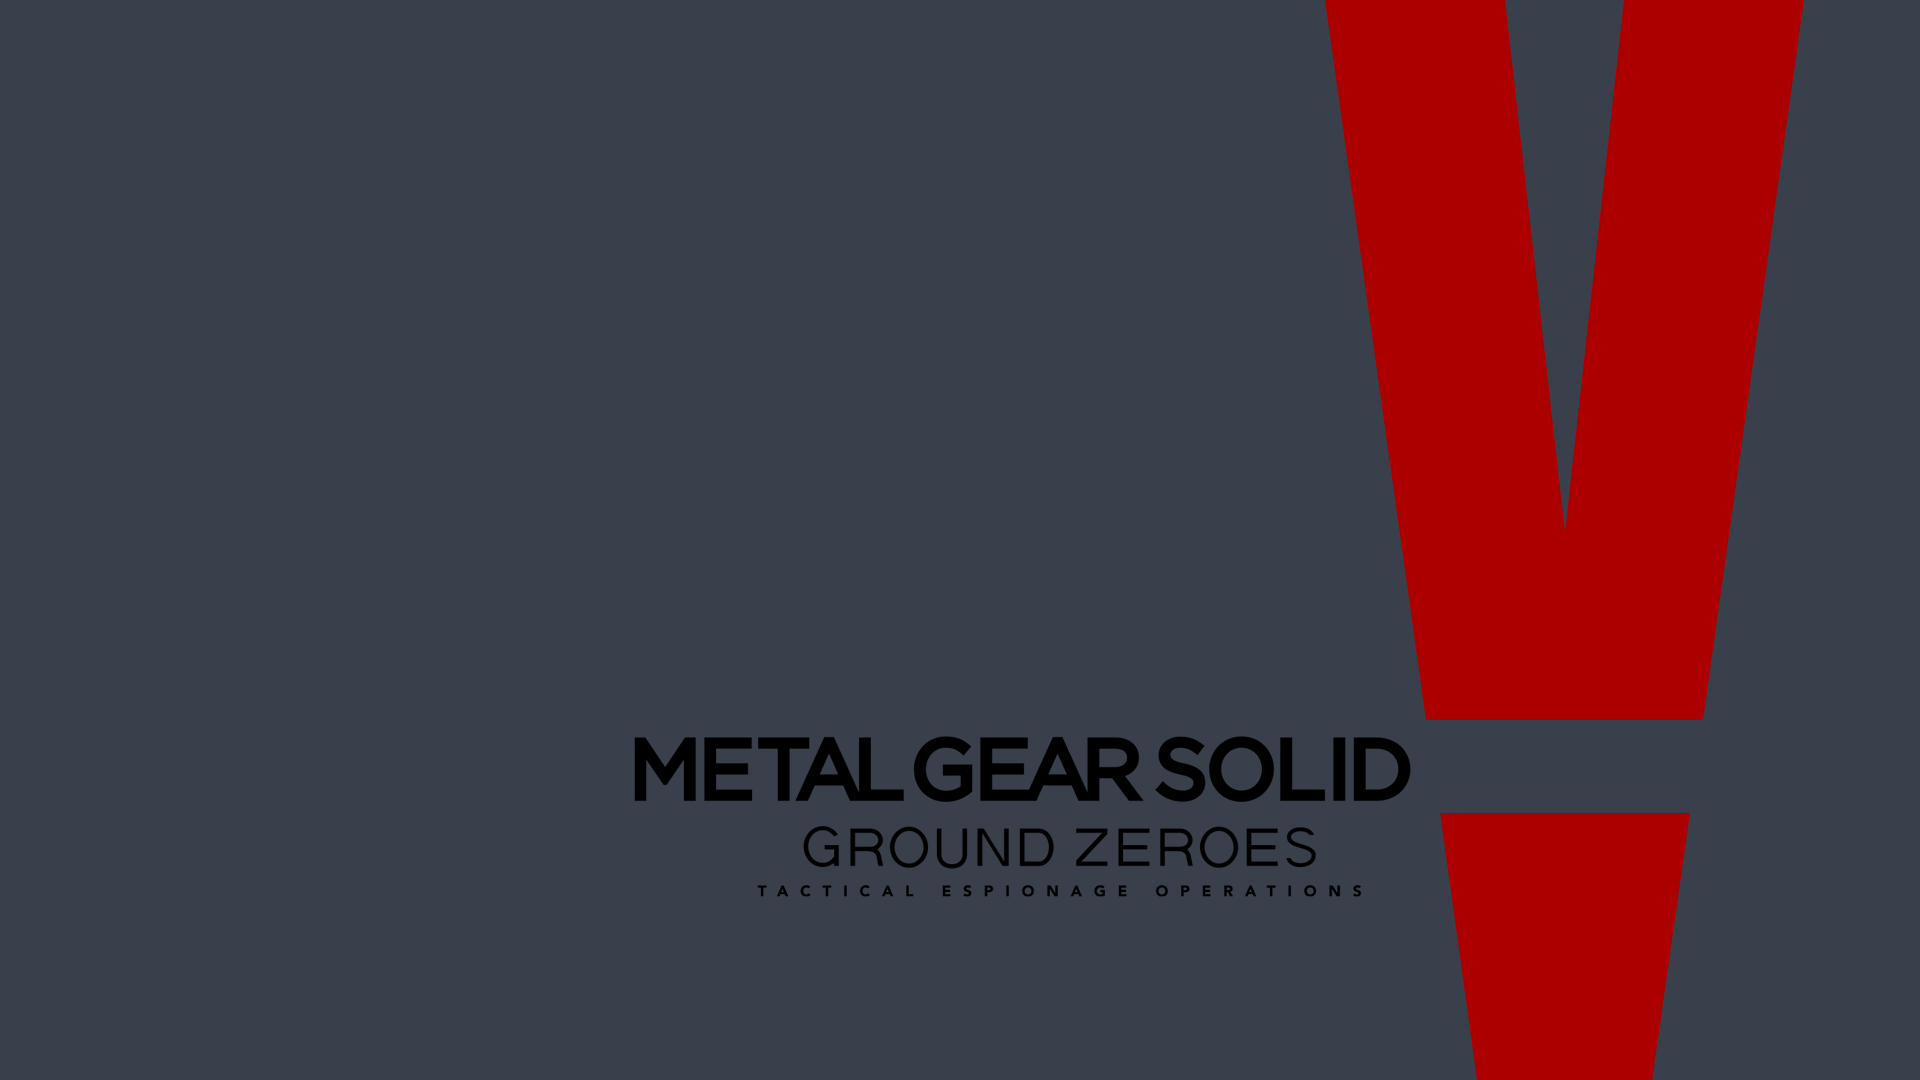 Wallpaper, Metal Gear Solid, Metal Gear Solid V The Phantom Pain, Metal Gear Solid V Ground Zeroes 1920x1080